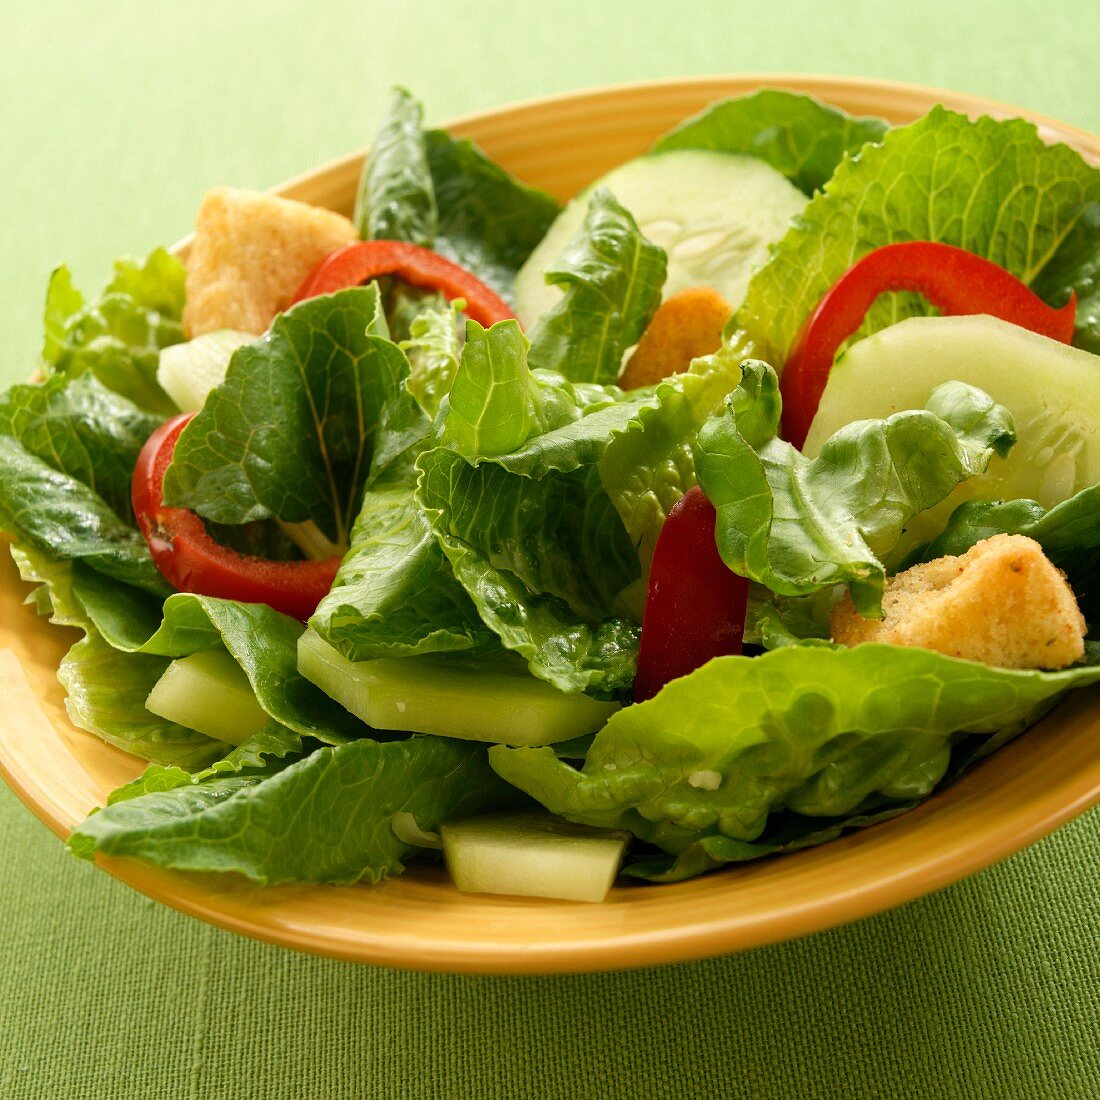 Simple Salad with Romain Lettuce, Cucumber, Red Pepper and Croutons; In a Yellow Bowl